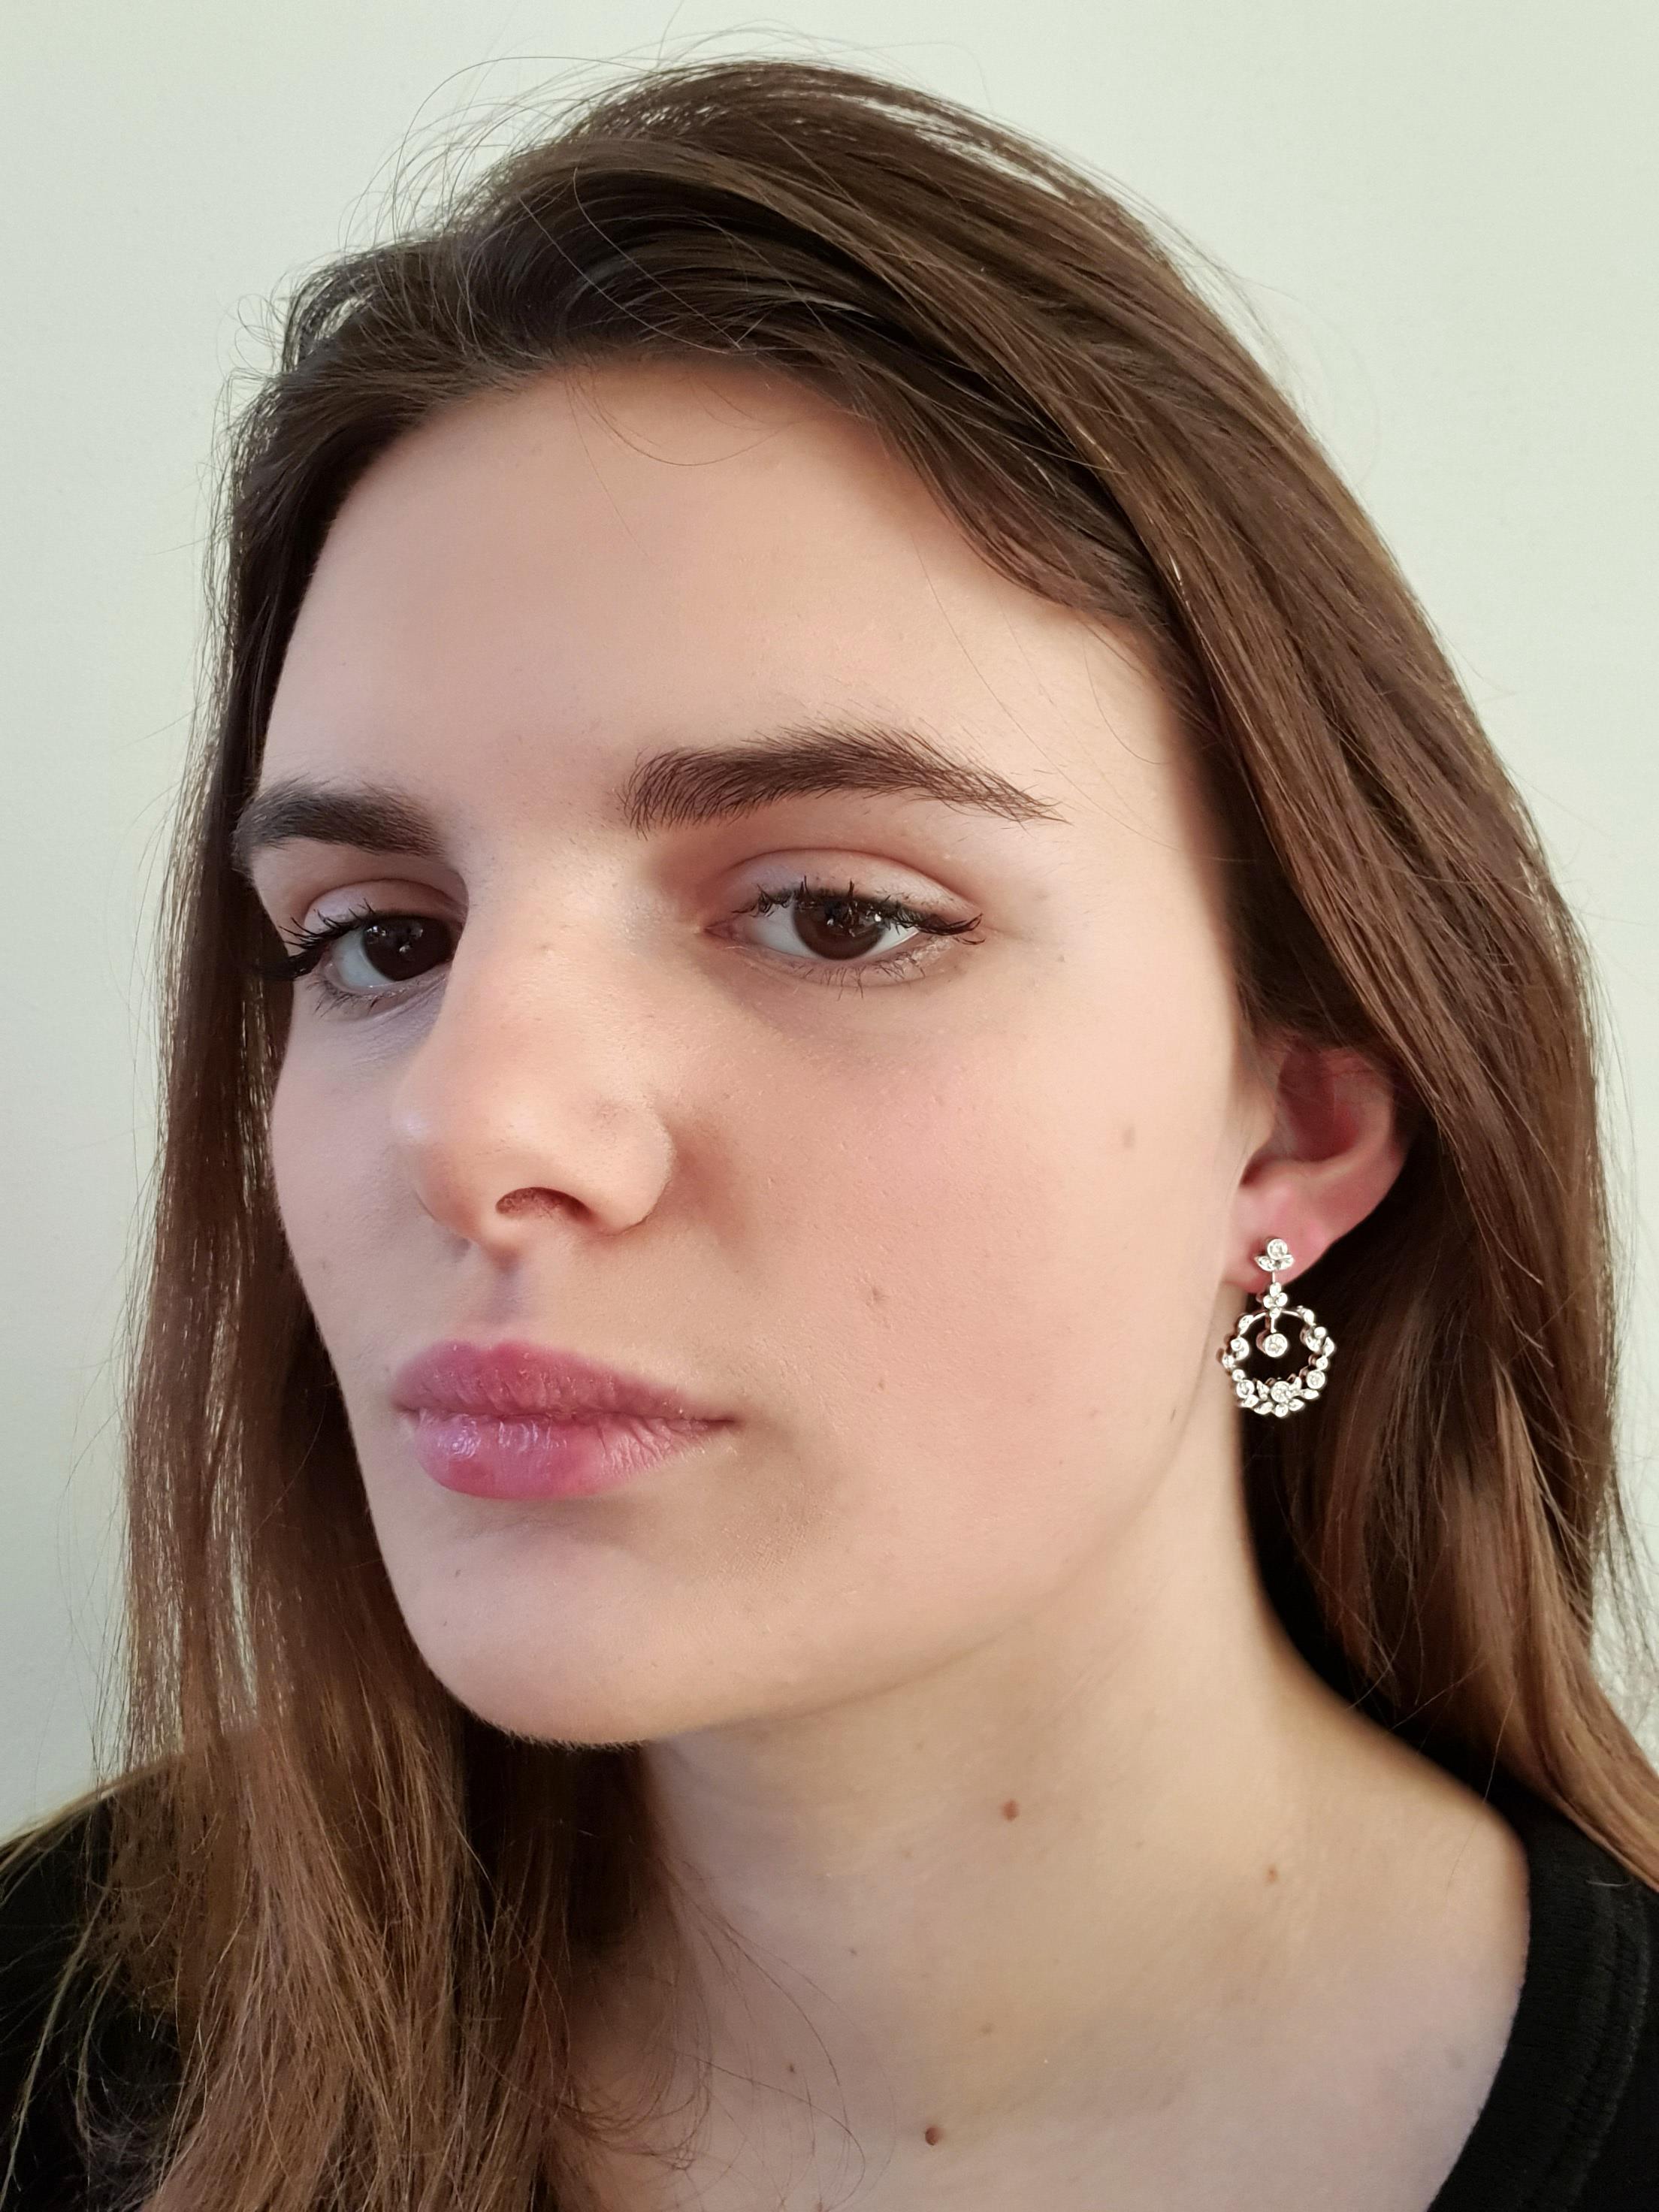 Dalben design Diamonds pendant earrings mounted in 18 kt white gold
with 56 round brillant cut diamonds F-G color and VS clarity.
Total diamond weight :1,07 carats.
The earrings are completely hand made in our atelier in Italy Como with a rigorous